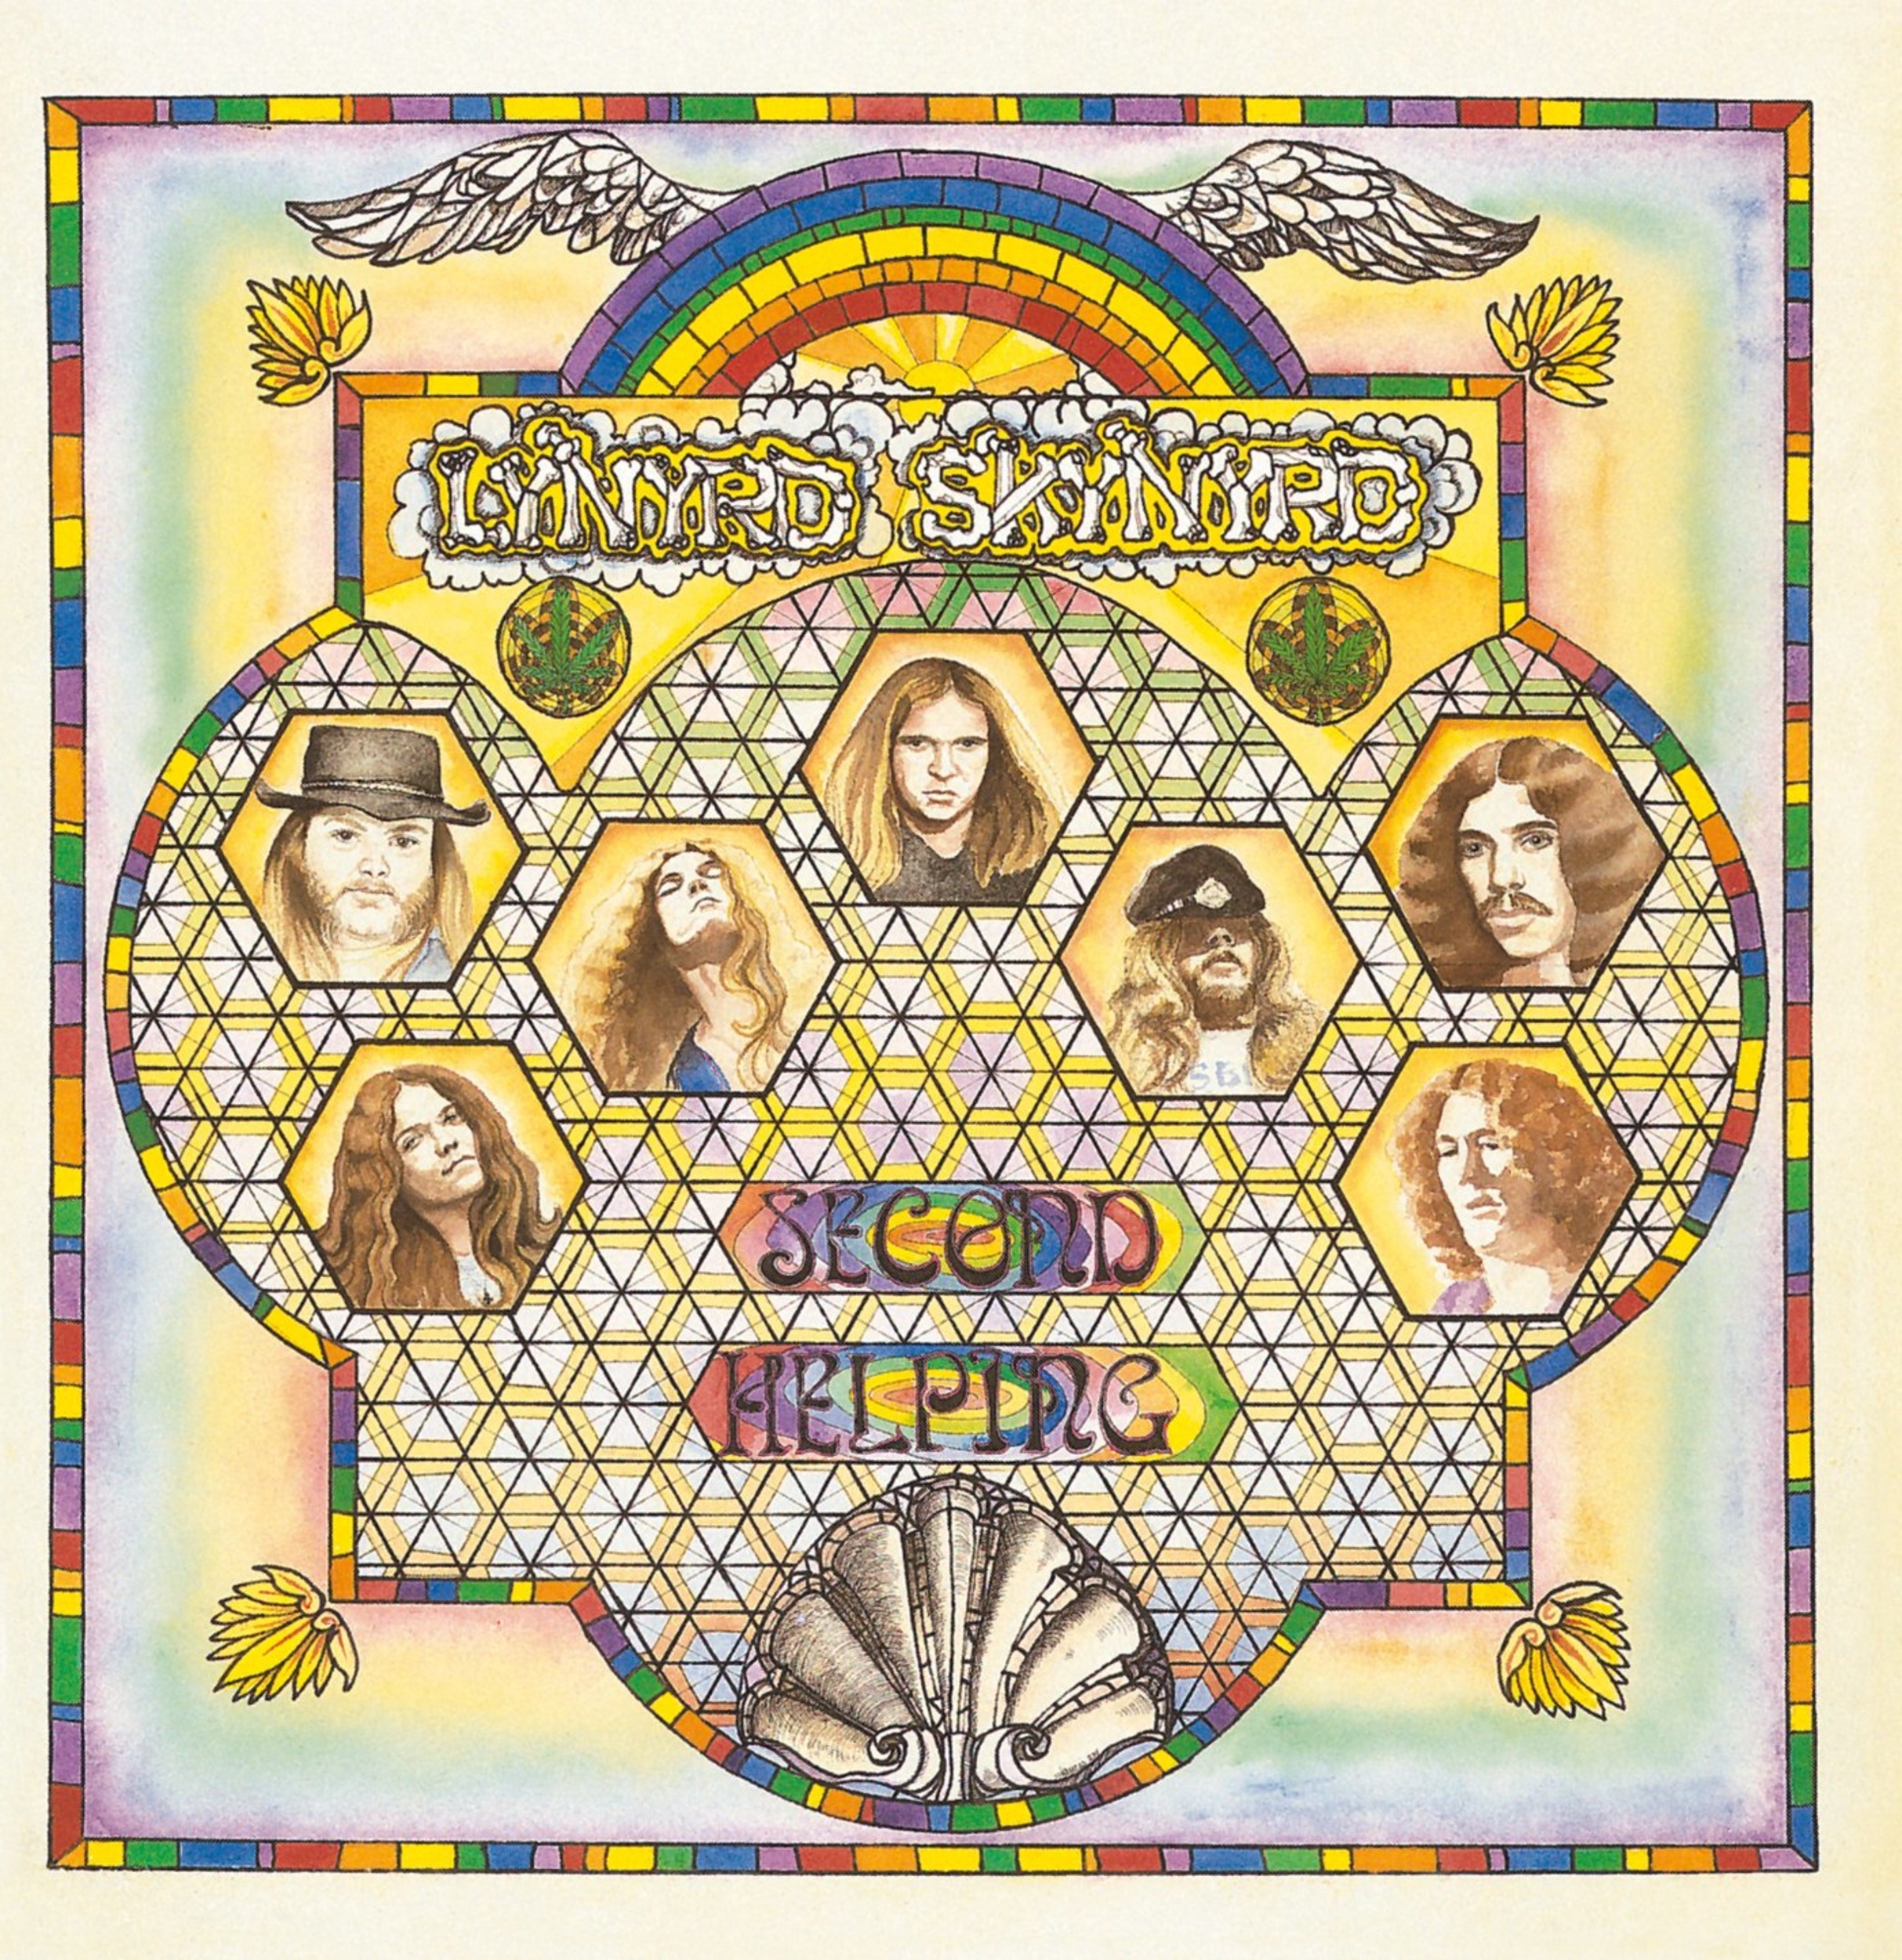 <p>Despite the fact that co-writers Ronnie Van Zant, Gary Rossington, and Ed King weren't from Alabama, they came together to create what's arguably the rock anthem of the South. From King's count-off into the famous opening riff to Van Zant's request to "turn it up," "<a href="https://www.youtube.com/watch?v=RrmWFjnAP2E">Sweet Home Alabama</a>," from <em>Second</em> <em>Helping</em>, is one of the most iconic songs in music history. It was <a href="https://www.countryliving.com/life/entertainment/a43715/sweet-home-alabama-song-meaning/">sort of the band's answer to Neil Young's "Southern Man."</a> It reached No. 8 on Billboard's Hot 100 and became of the title of a<a href="https://www.youtube.com/watch?v=E2ySMc4iT04"> popular romantic comedy </a>starring Reese Witherspoon.</p><p>You may also like: <a href='https://www.yardbarker.com/entertainment/articles/35_of_the_best_cameos_and_recurring_roles_on_friends_040824/s1__27120515'>35 of the best cameos and recurring roles on 'Friends'</a></p>